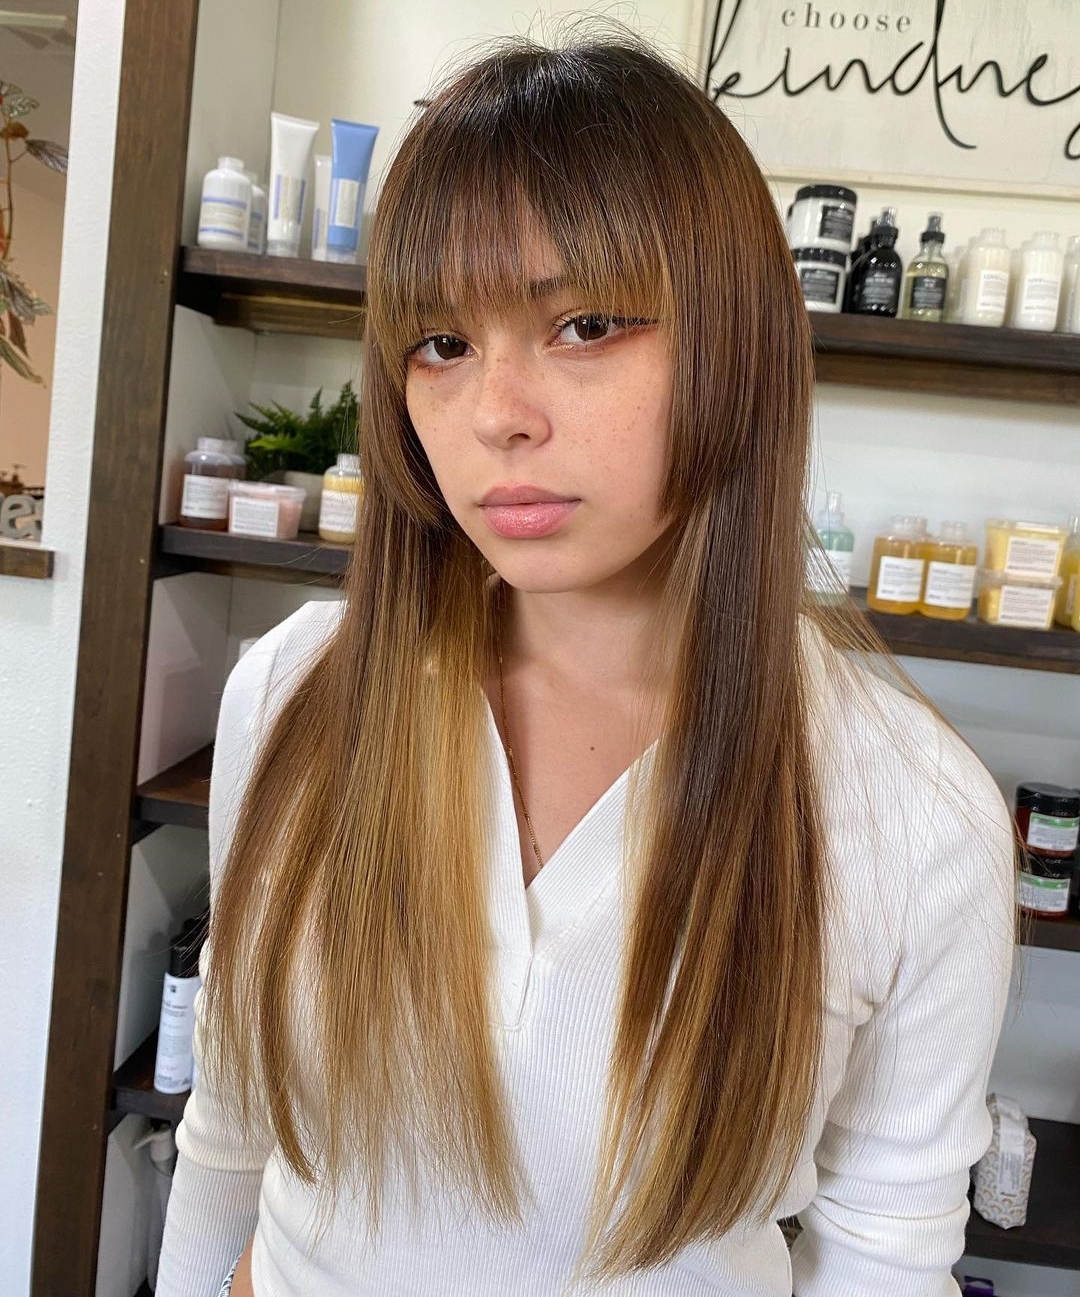 Traditional Hime Cut on Straight Long Hair